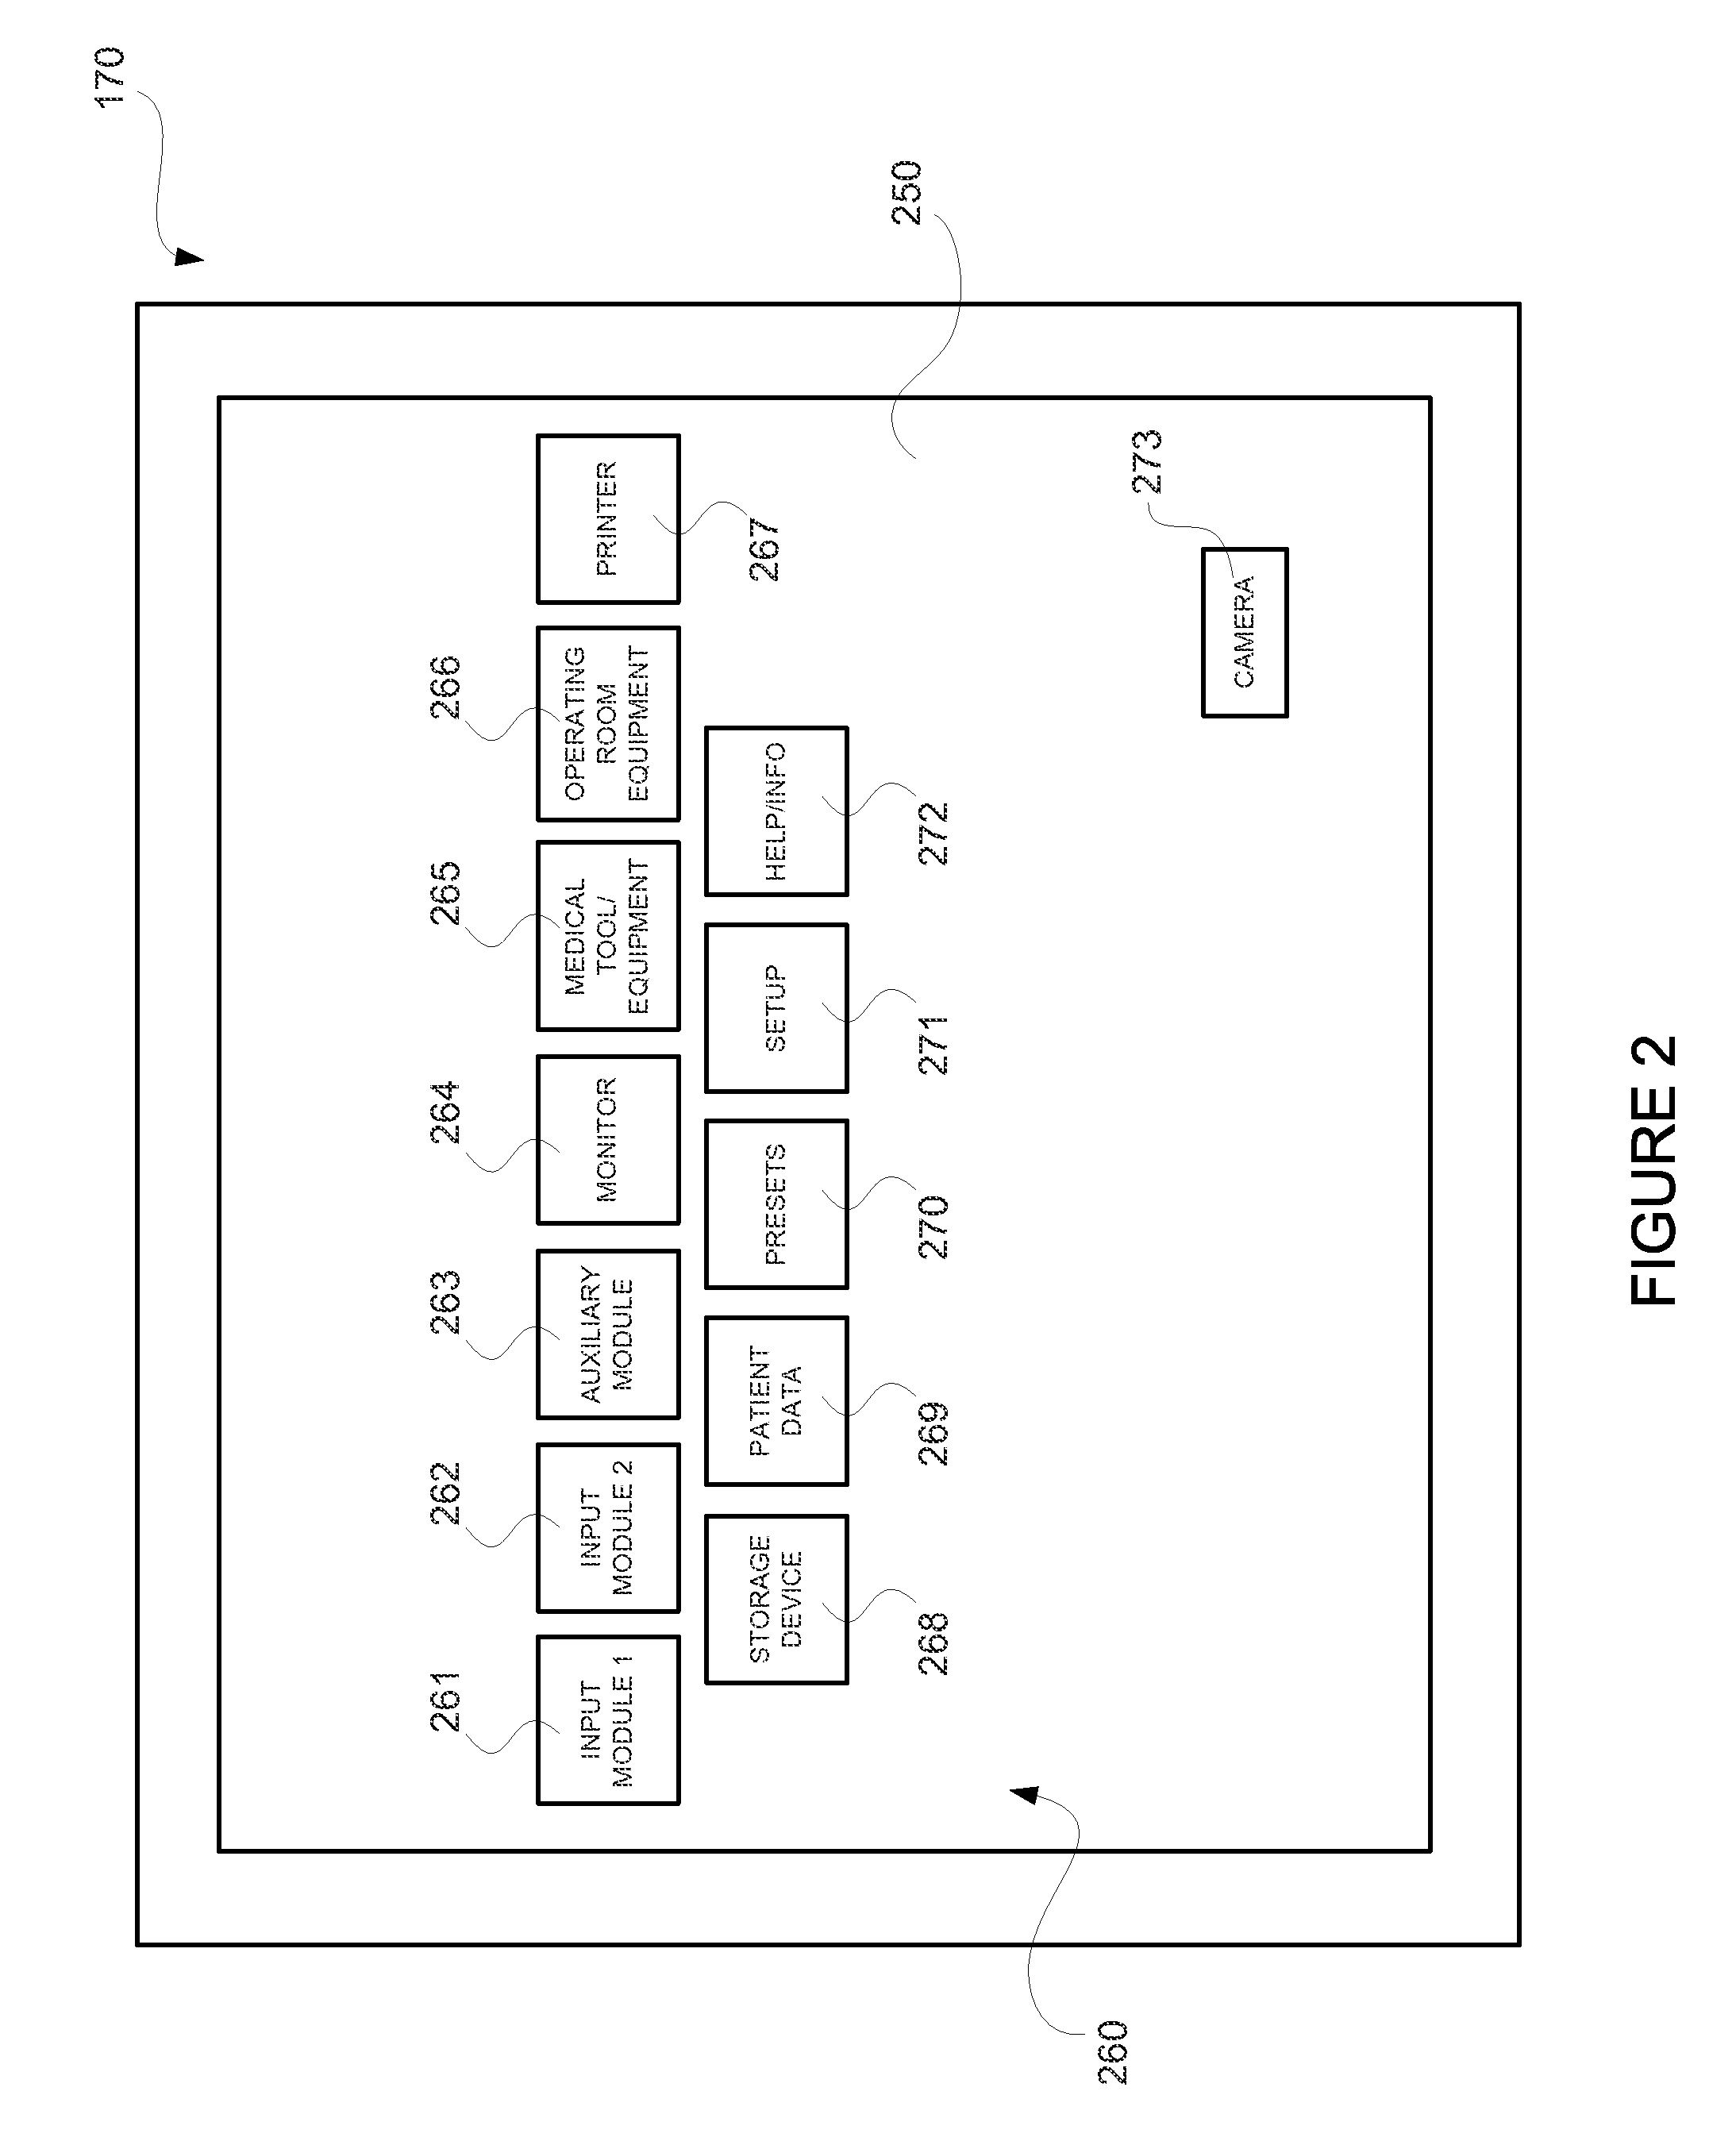 Control System For Modular Imaging Device